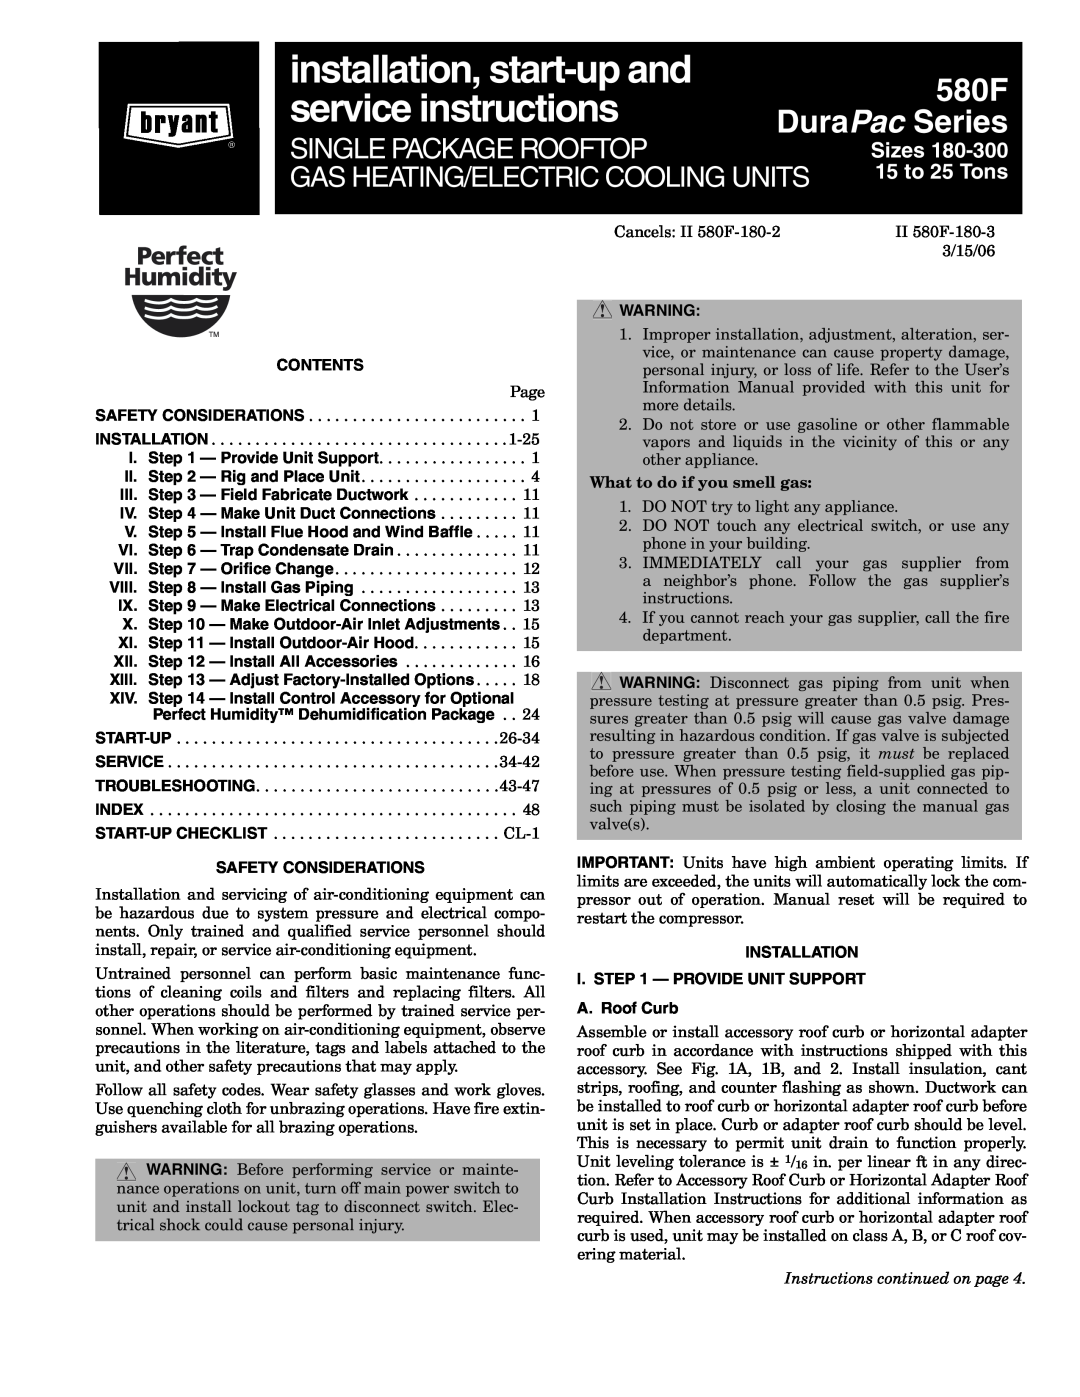 Bryant 580F installation instructions Important - Read Before Installing, Contents, III. - Install External Trap for 